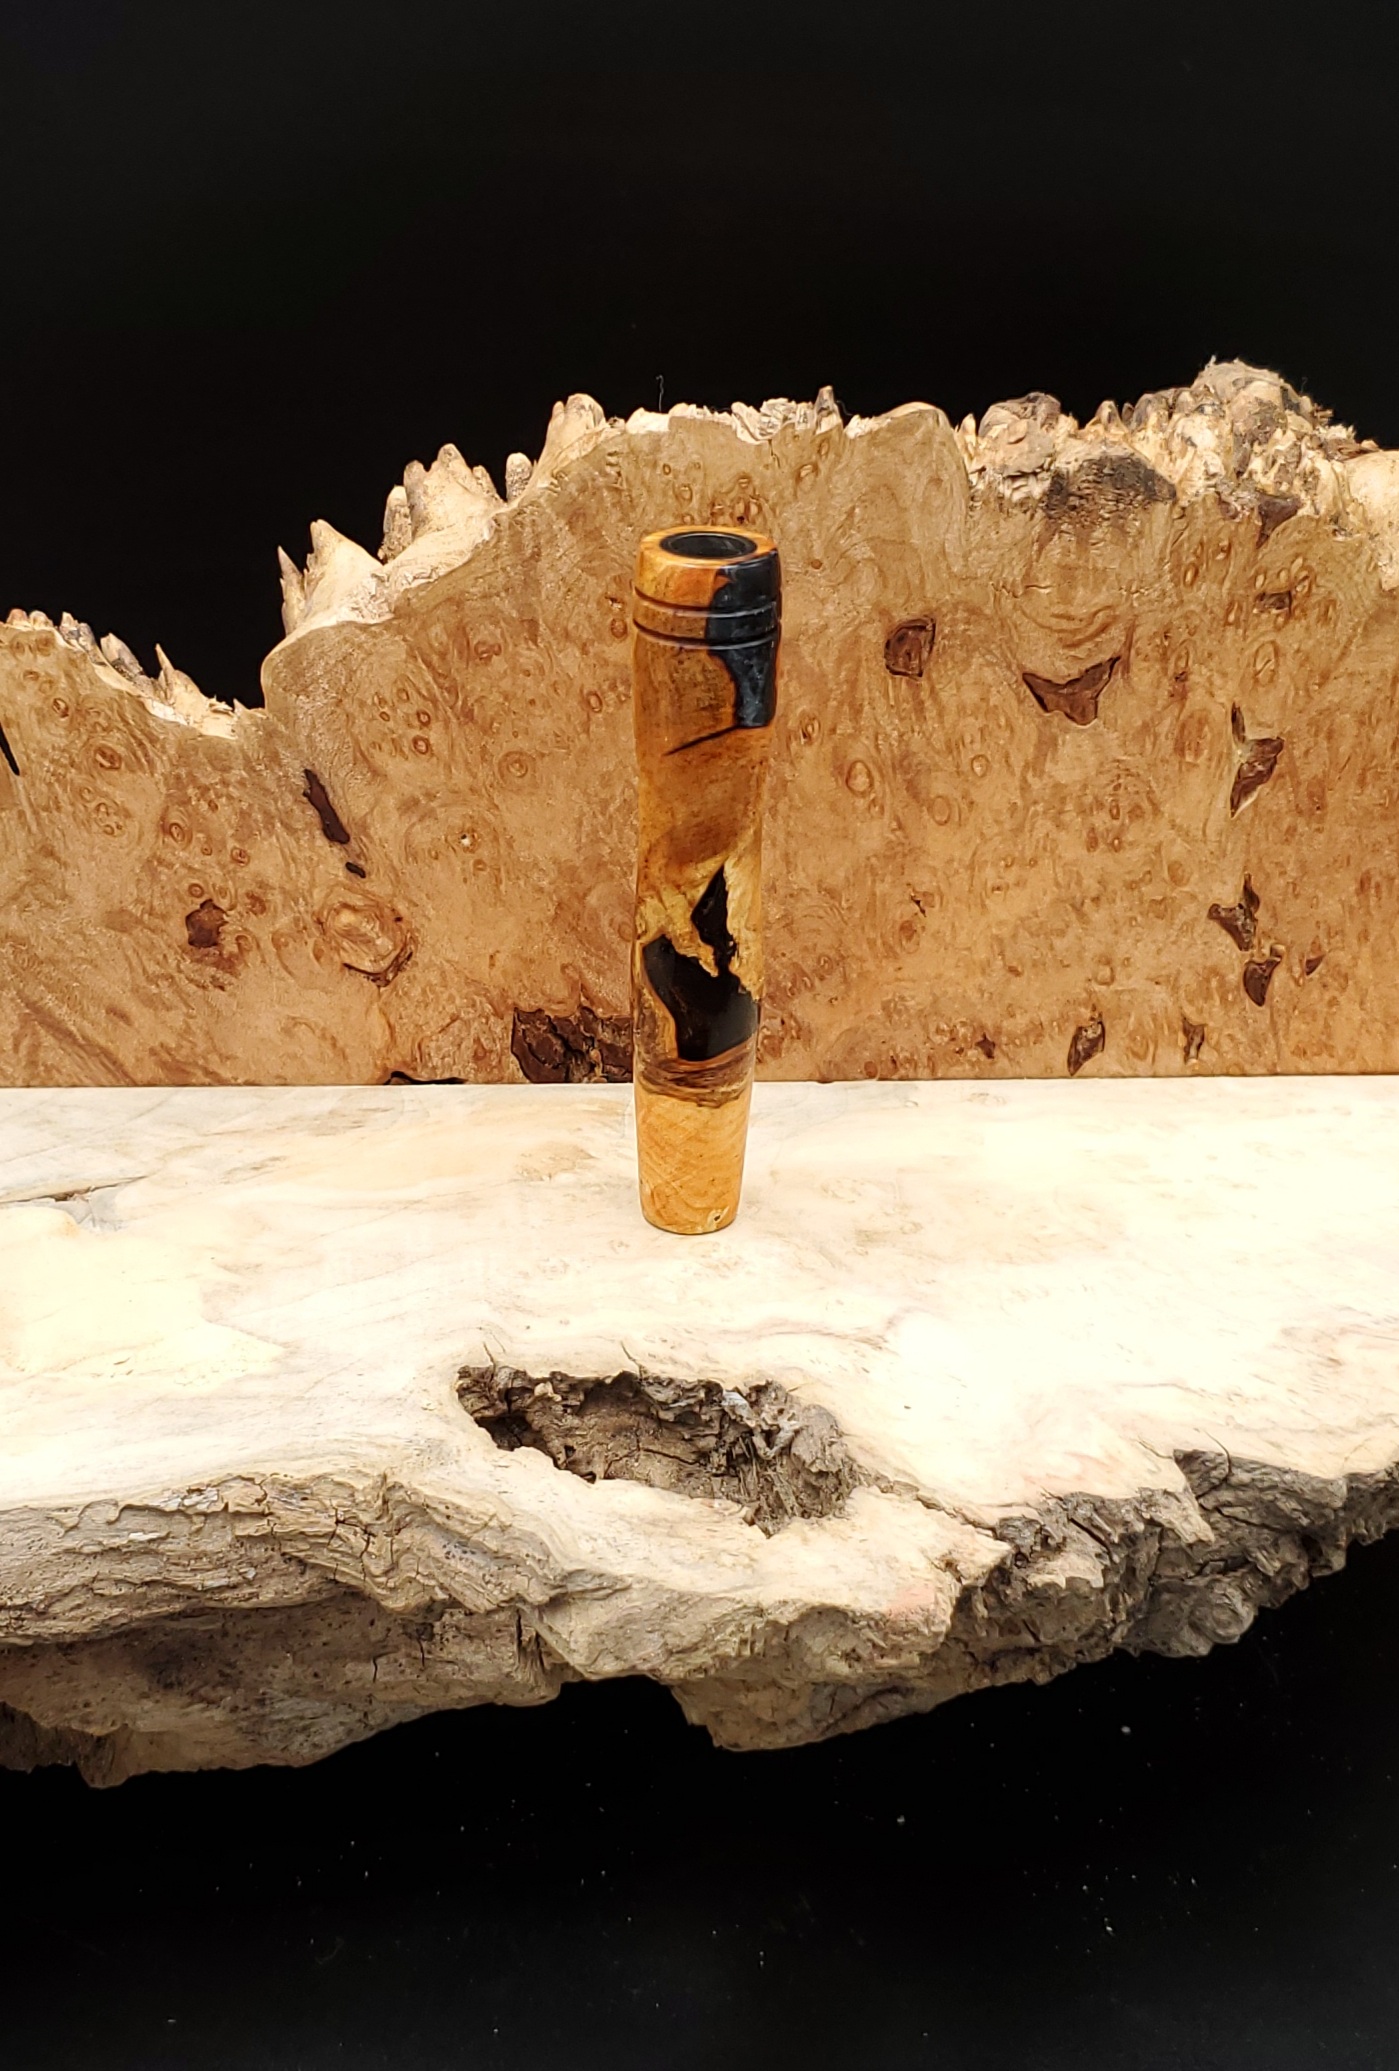 This image portrays Stem/Midsection for Dynavap - Galaxy Burl Wood by Dovetail Woodwork.